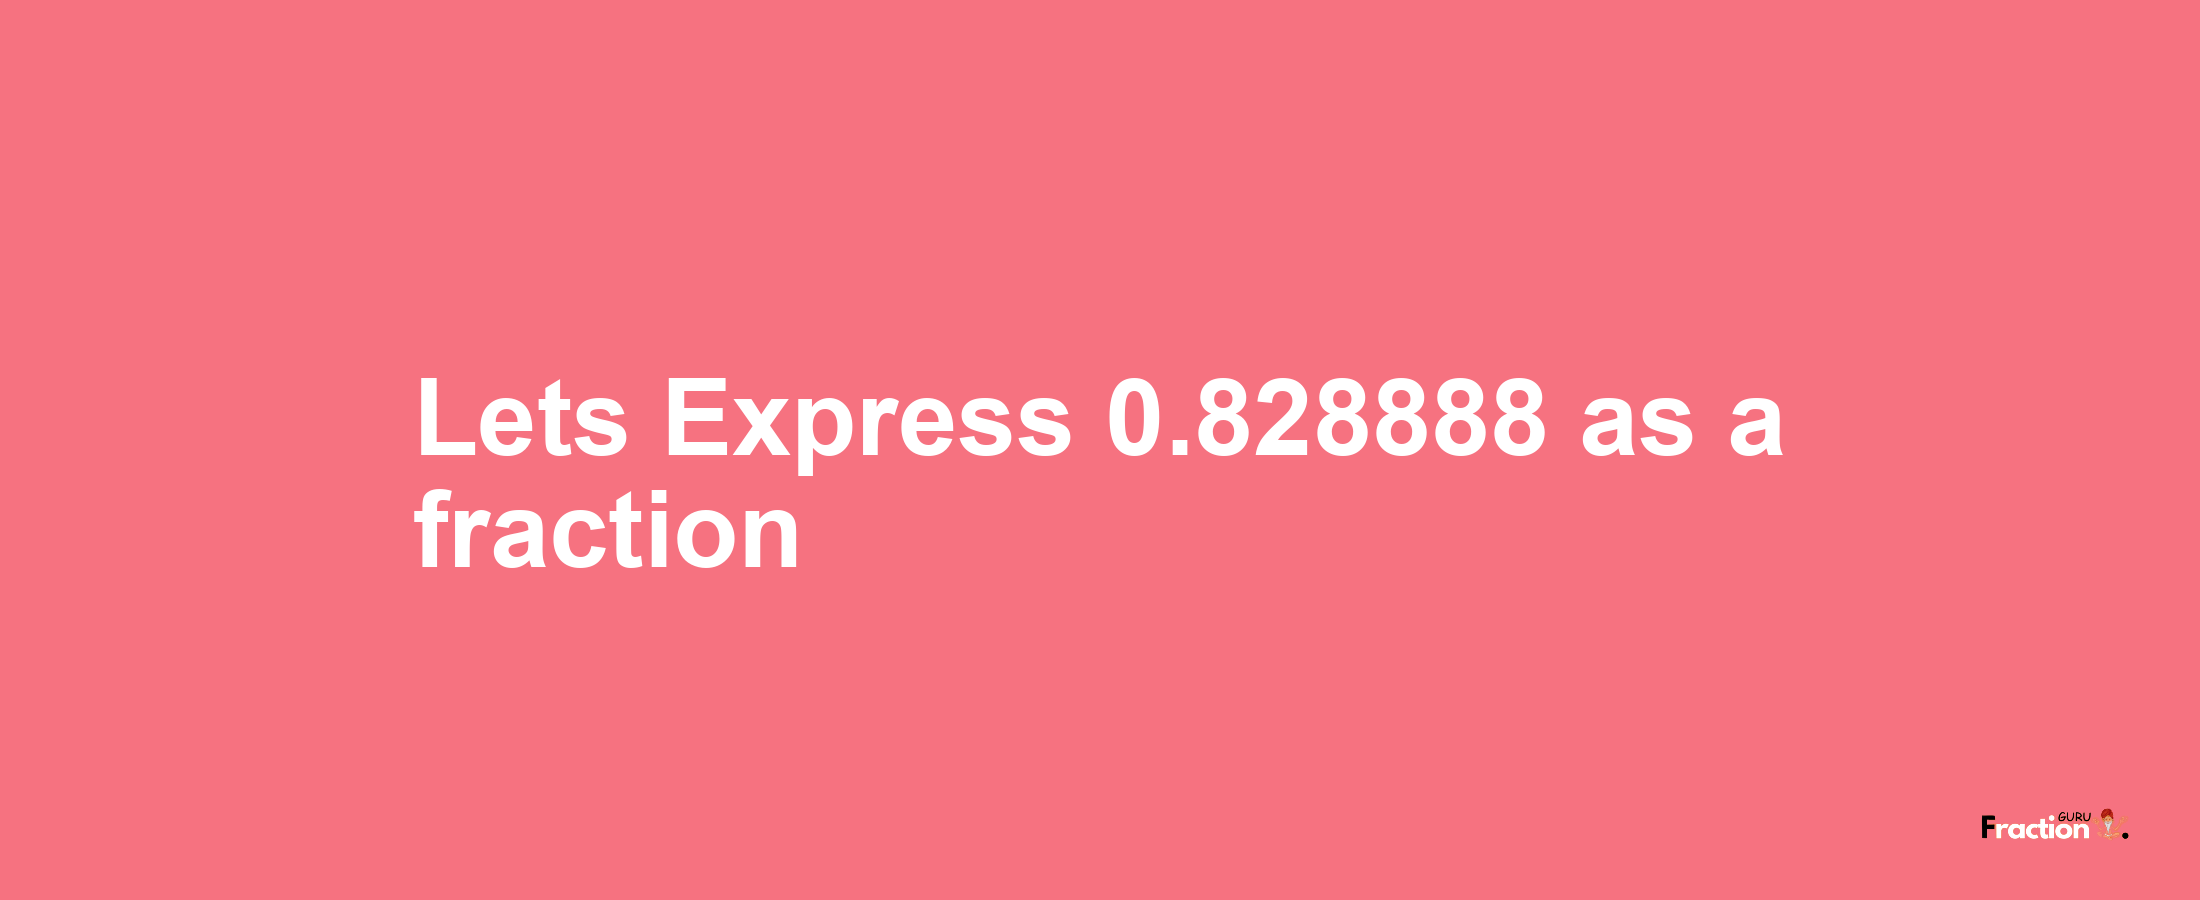 Lets Express 0.828888 as afraction